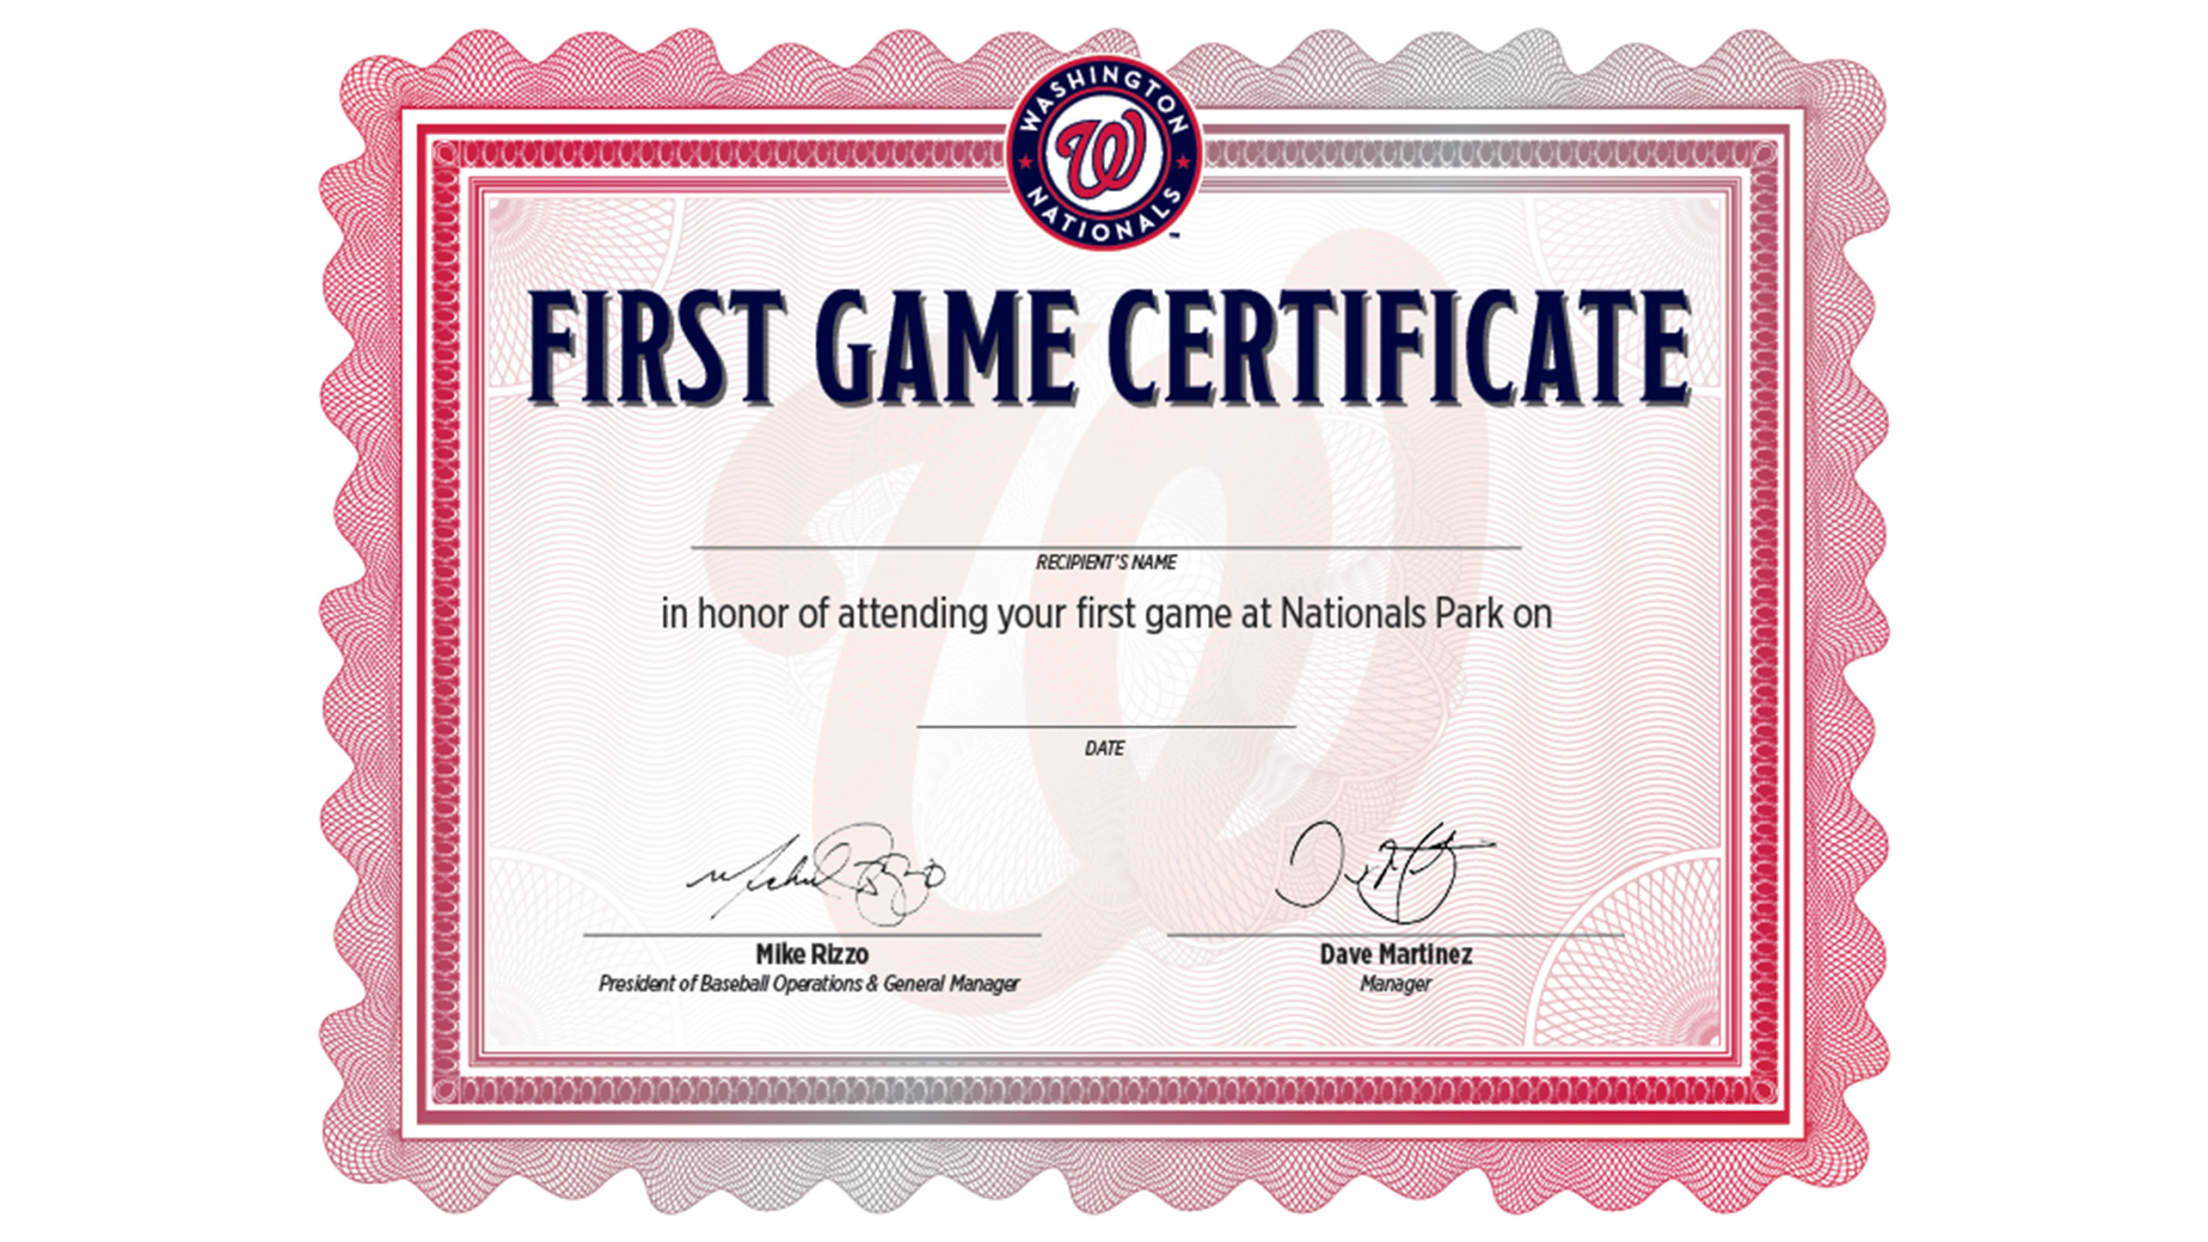 First Game Certificate